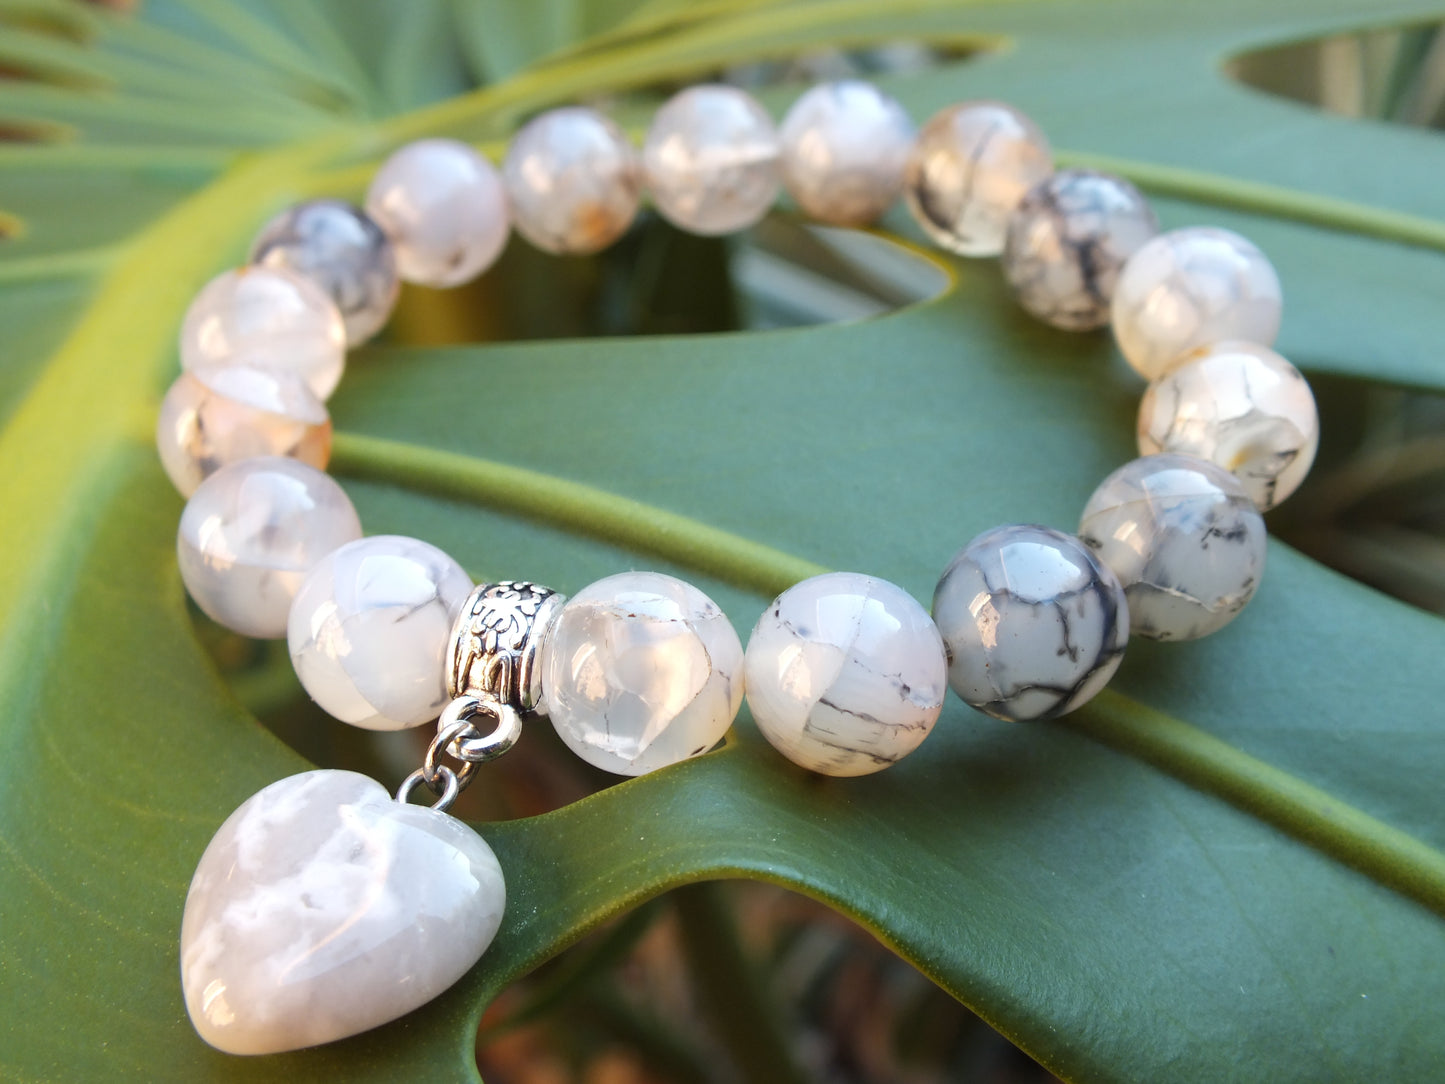 Dragon's Vein Agate with Grey Agate Stone Heart Bracelet